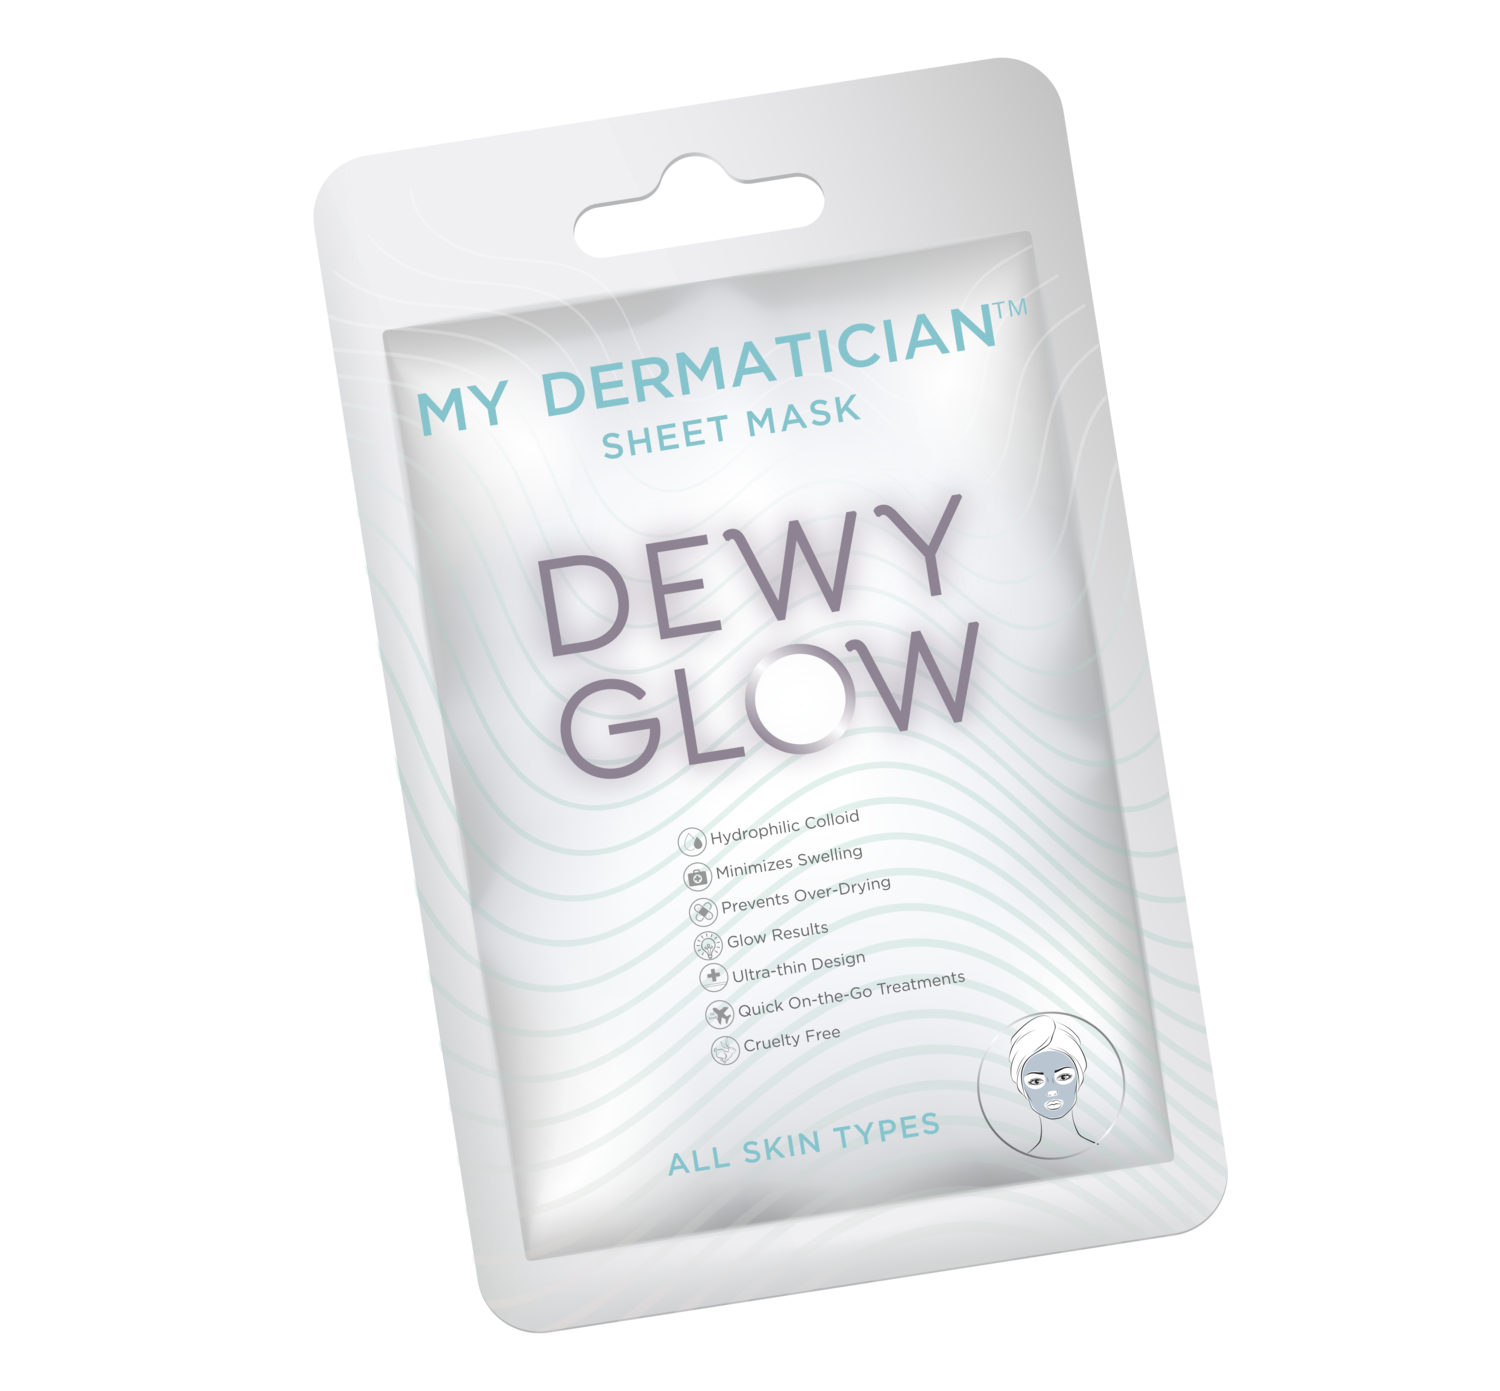 My Dematician Dewy Glow Masque Pack of 5